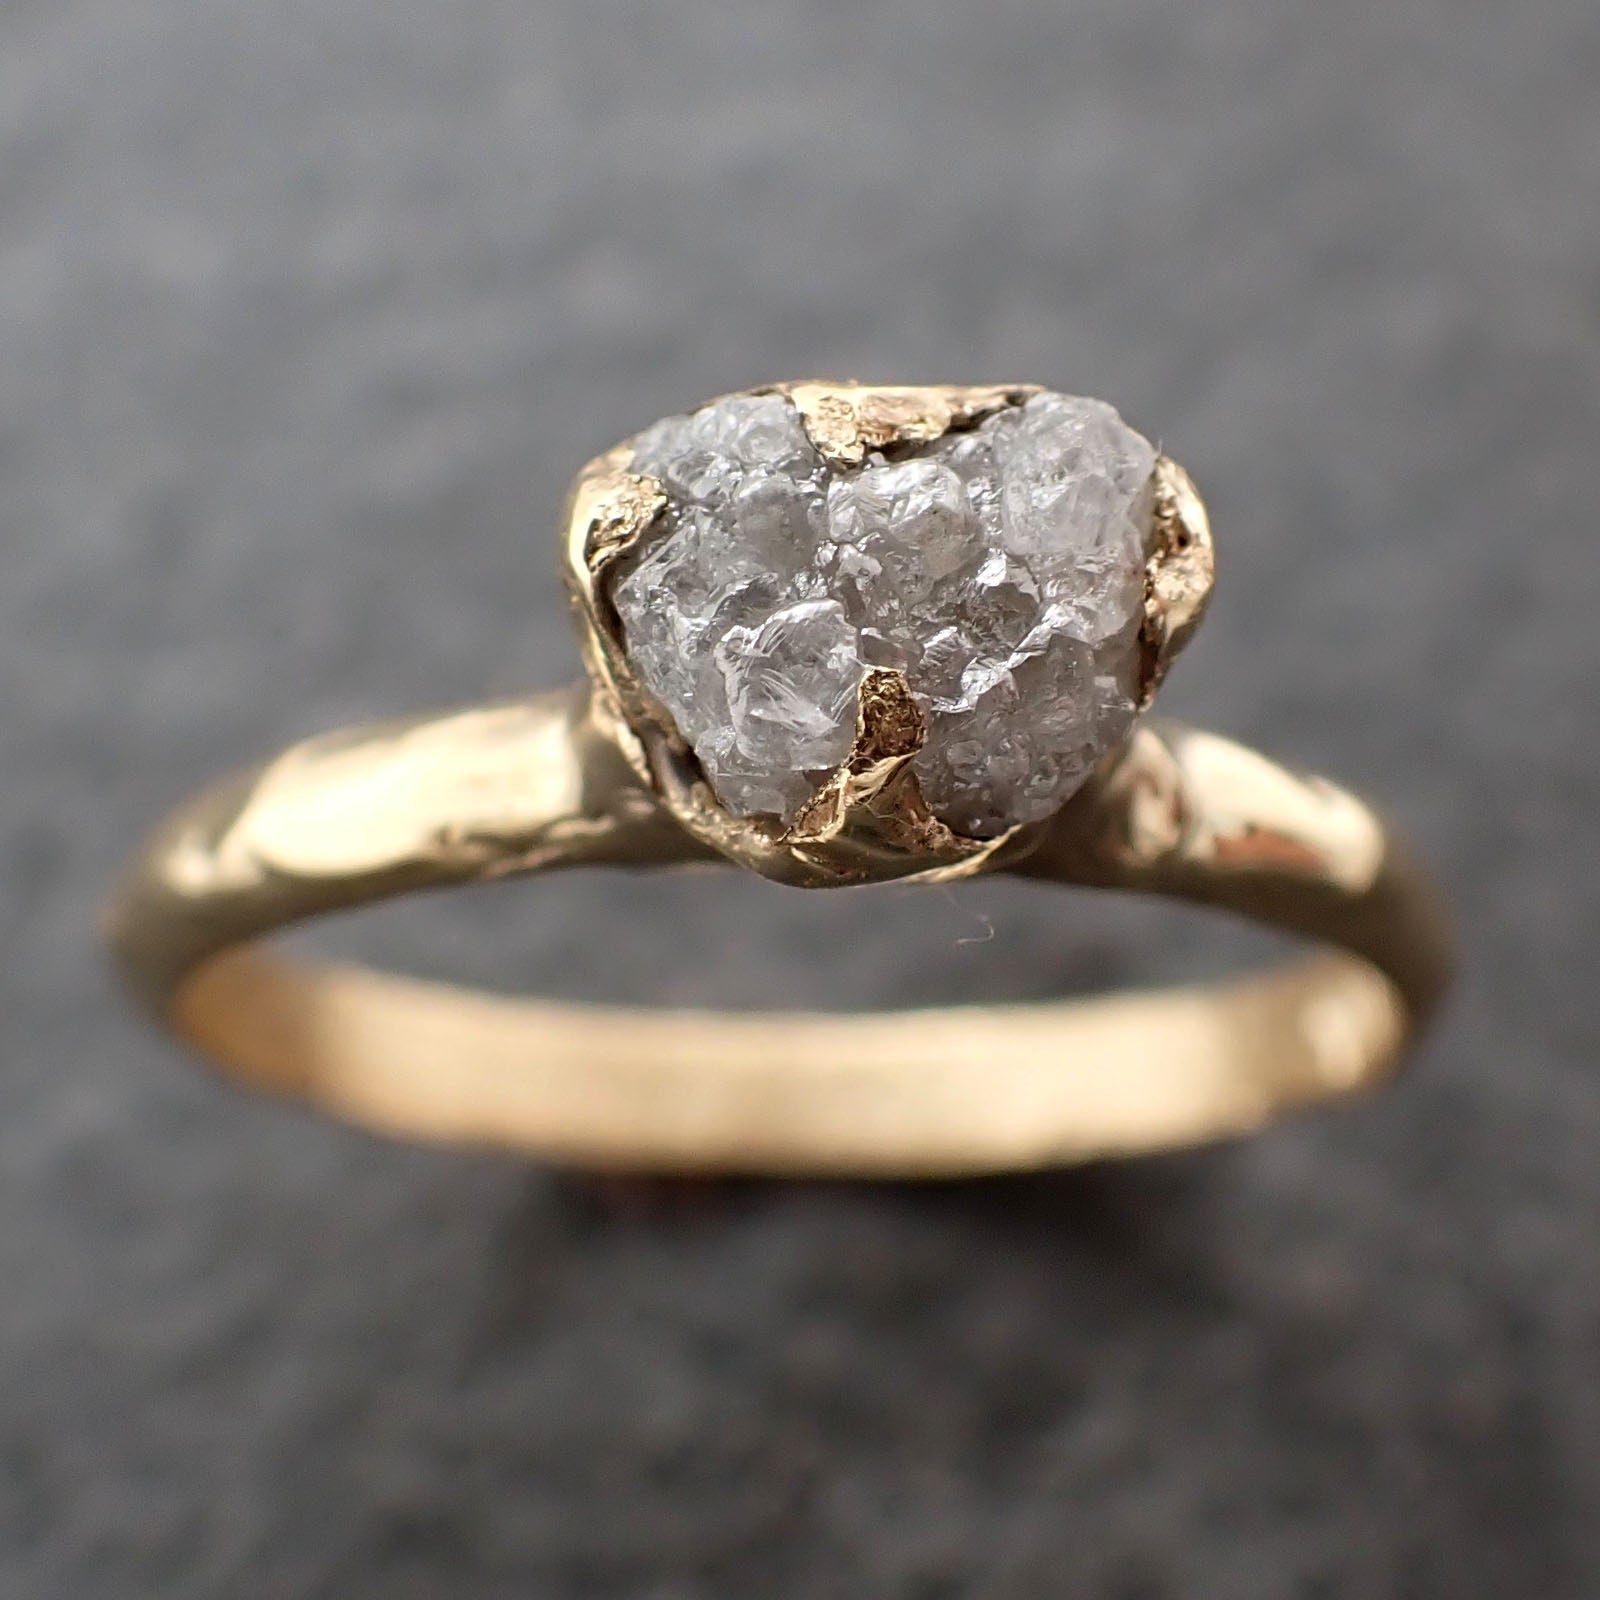 Raw Diamond Engagement Ring Rough Uncut Diamond Solitaire Recycled 14k yellow gold Conflict Free Diamond Wedding Promise 3077